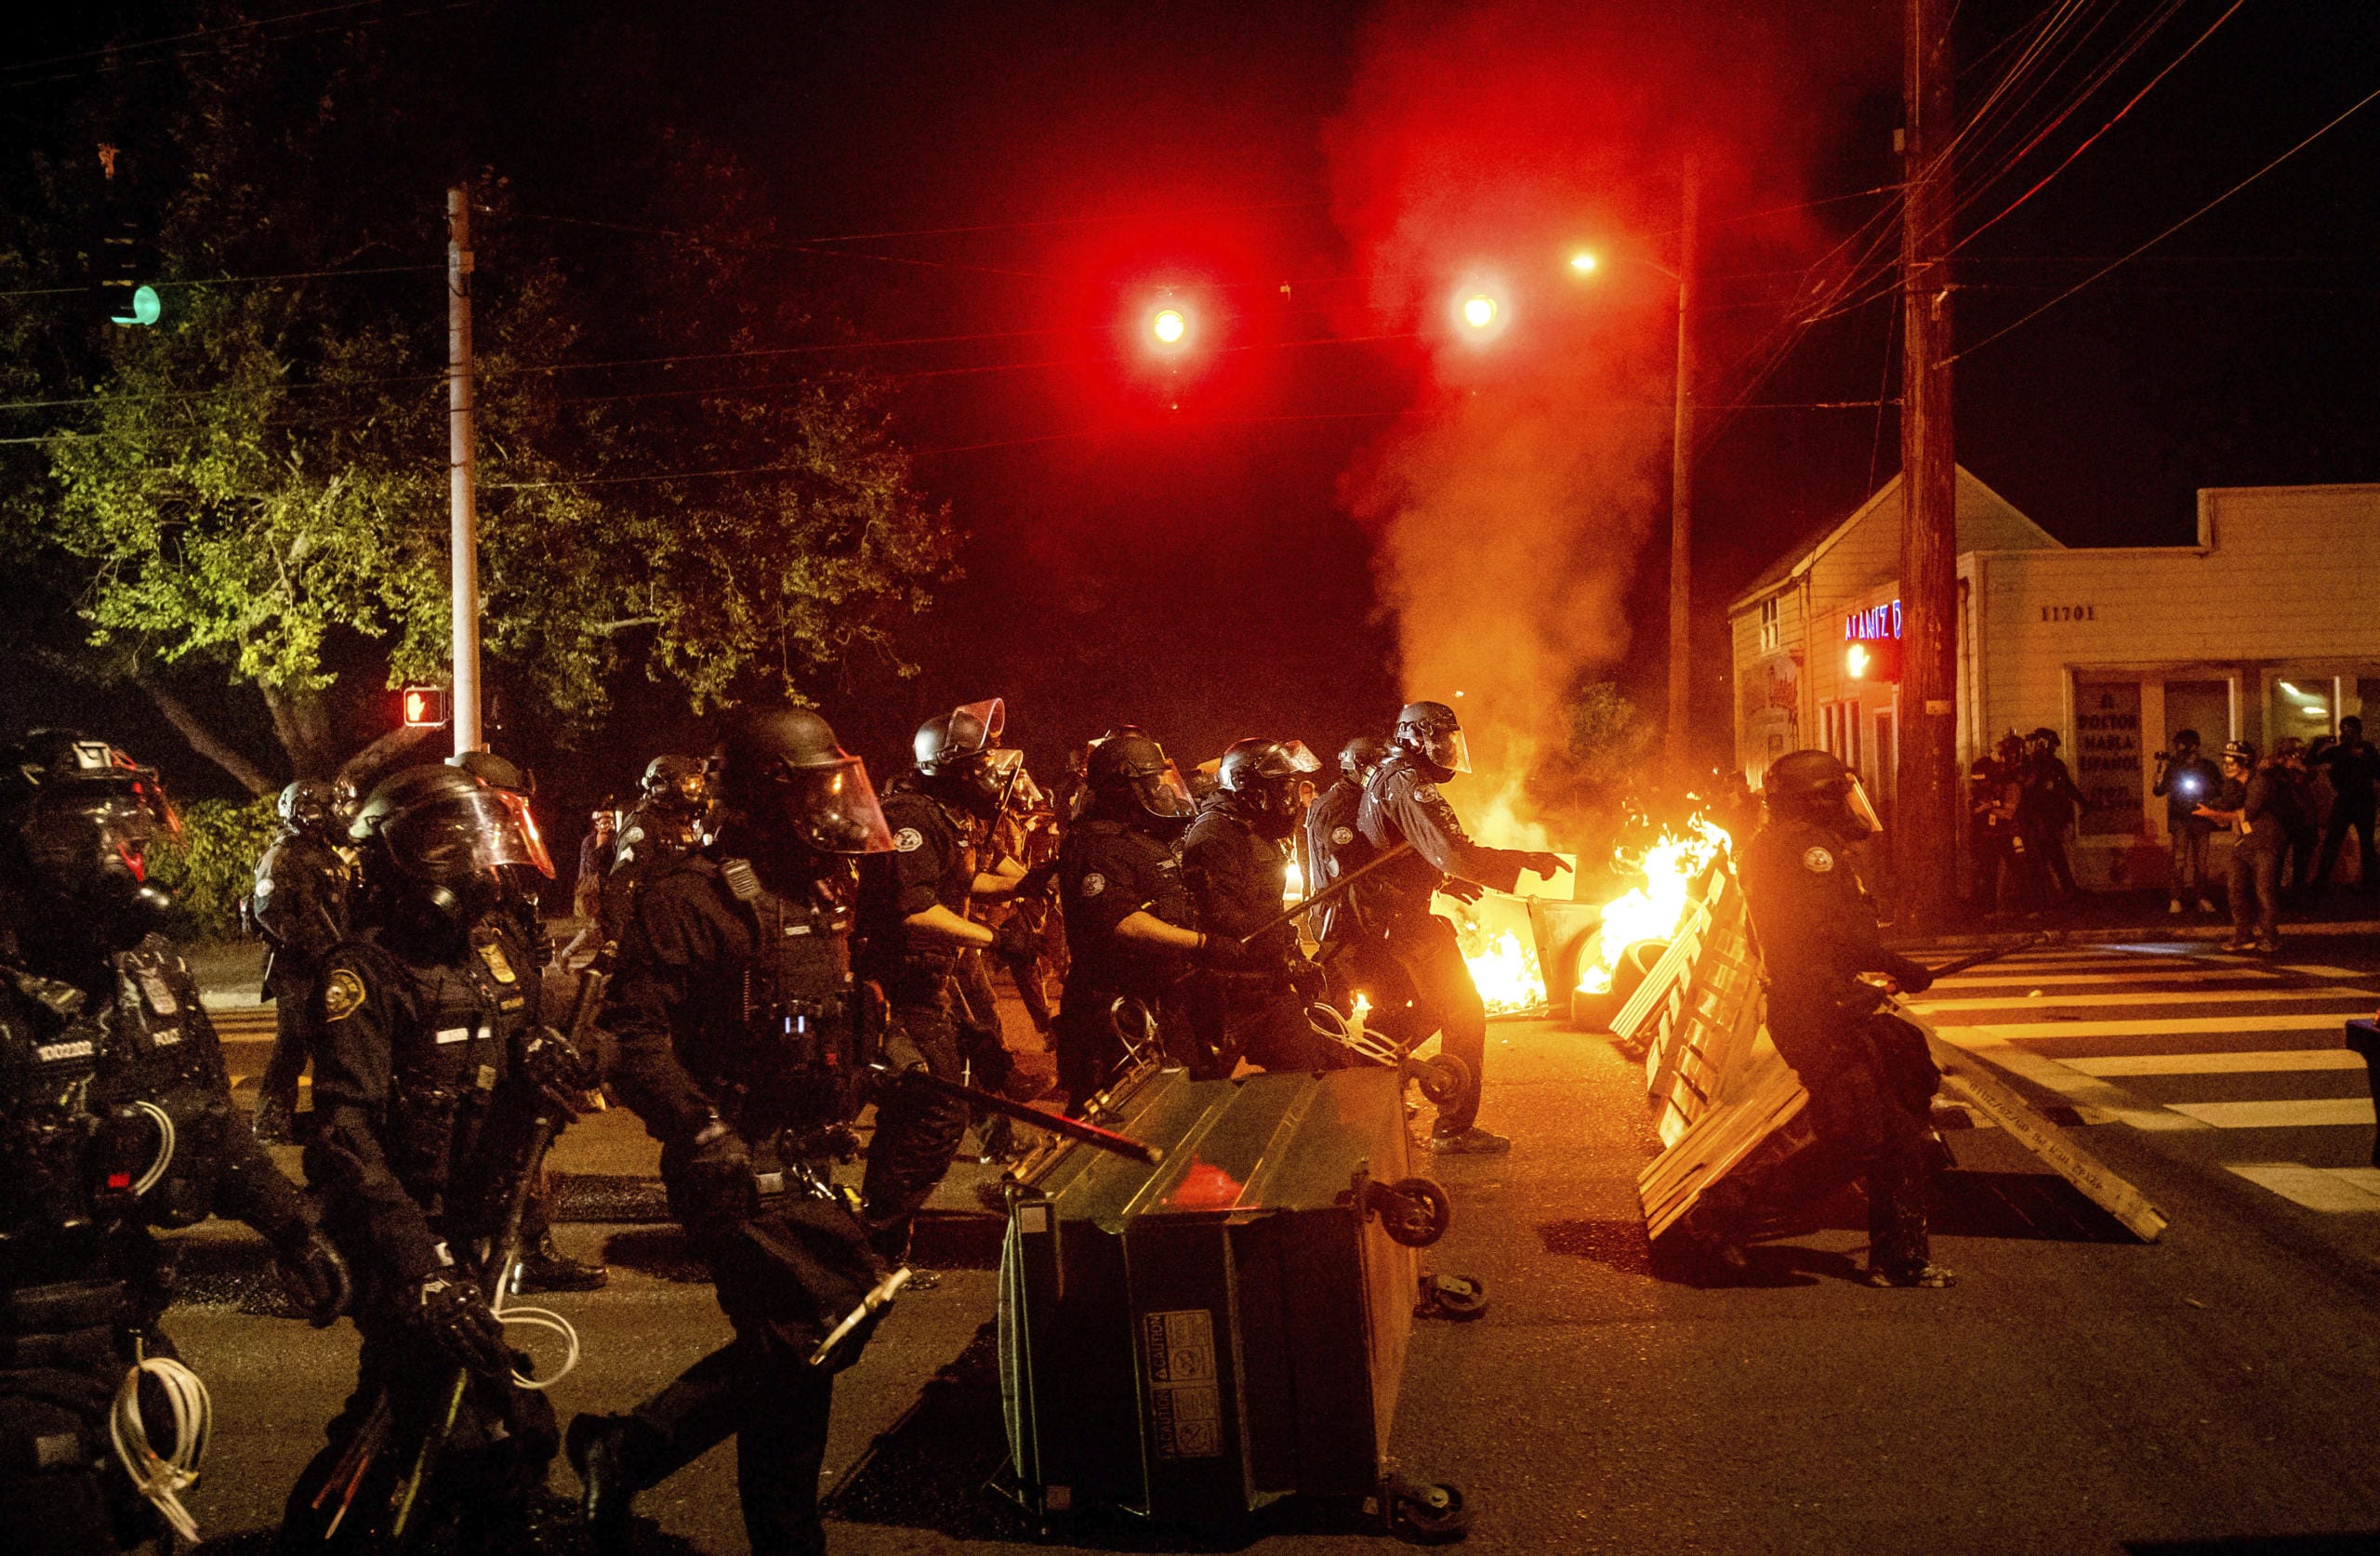 Police officers pass a fire lit by protesters on Saturday, Sept. 5, 2020, in Portland, Ore. Hundreds of people gathered for rallies and marches against police violence and racial injustice Saturday night in Portland, Oregon, as often violent nightly demonstrations that have happened for 100 days since George Floyd was killed showed no signs of ceasing.